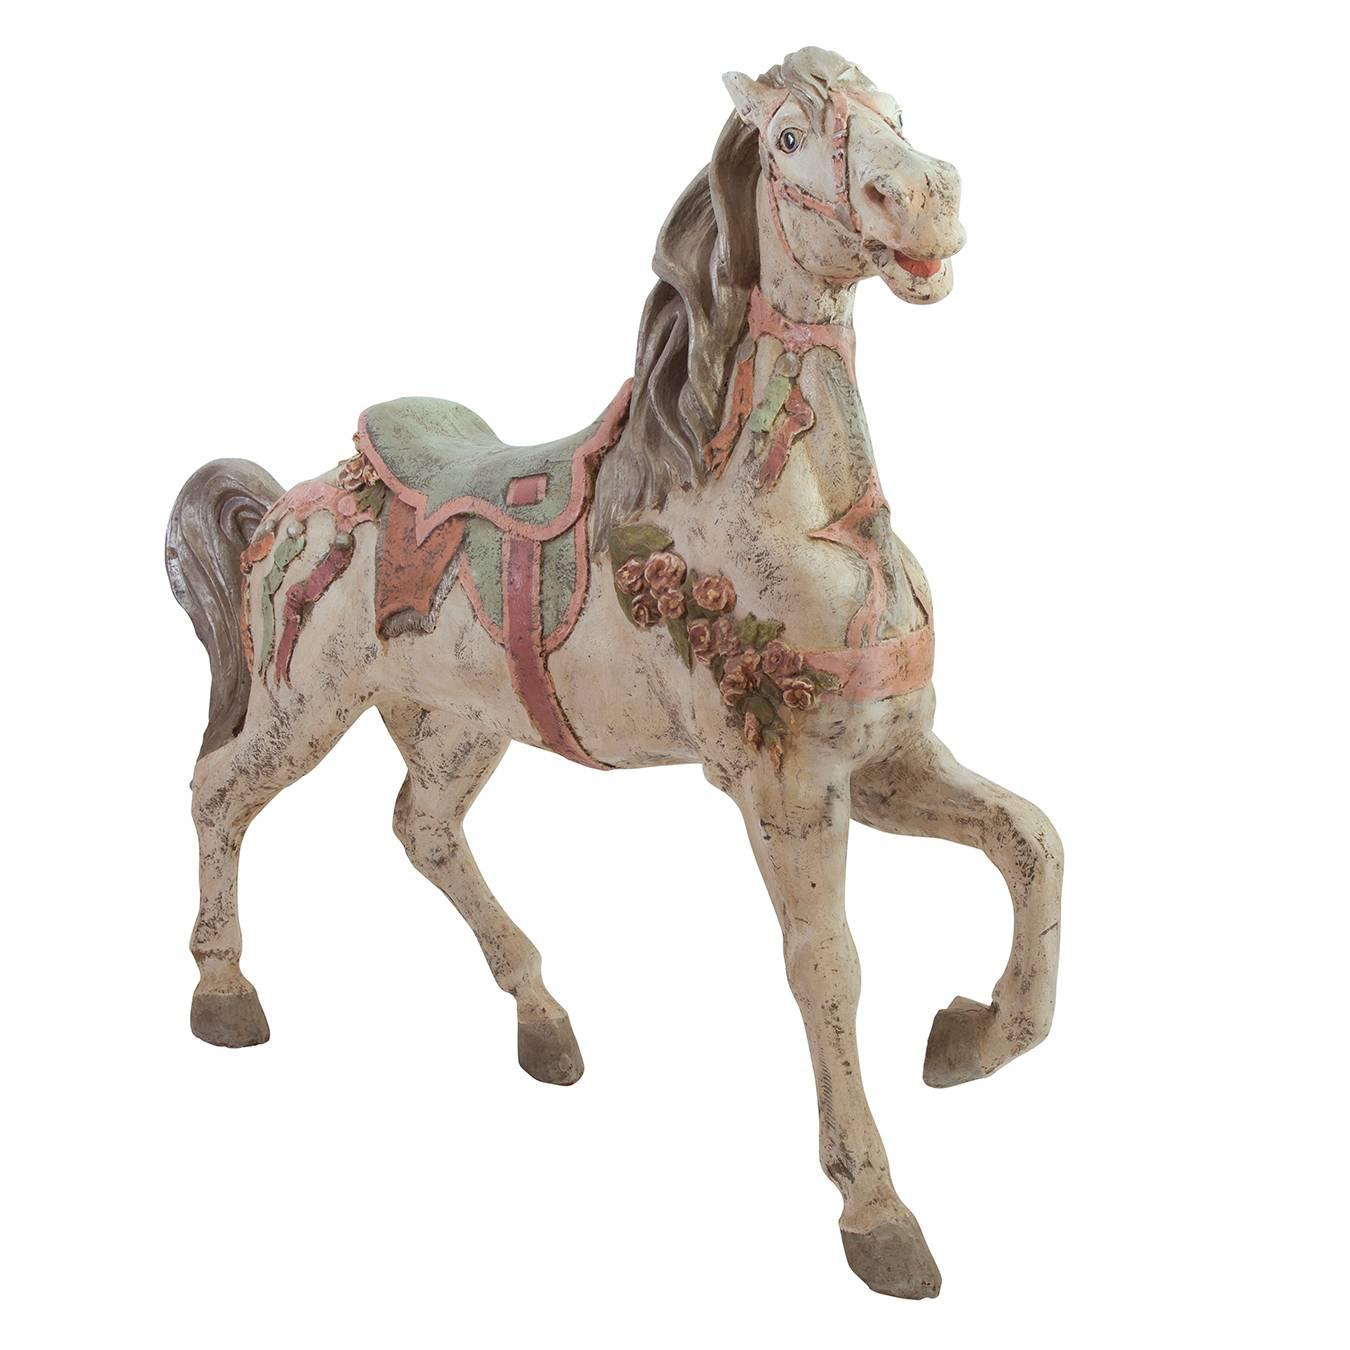 Antique hand-painted carousel pony.